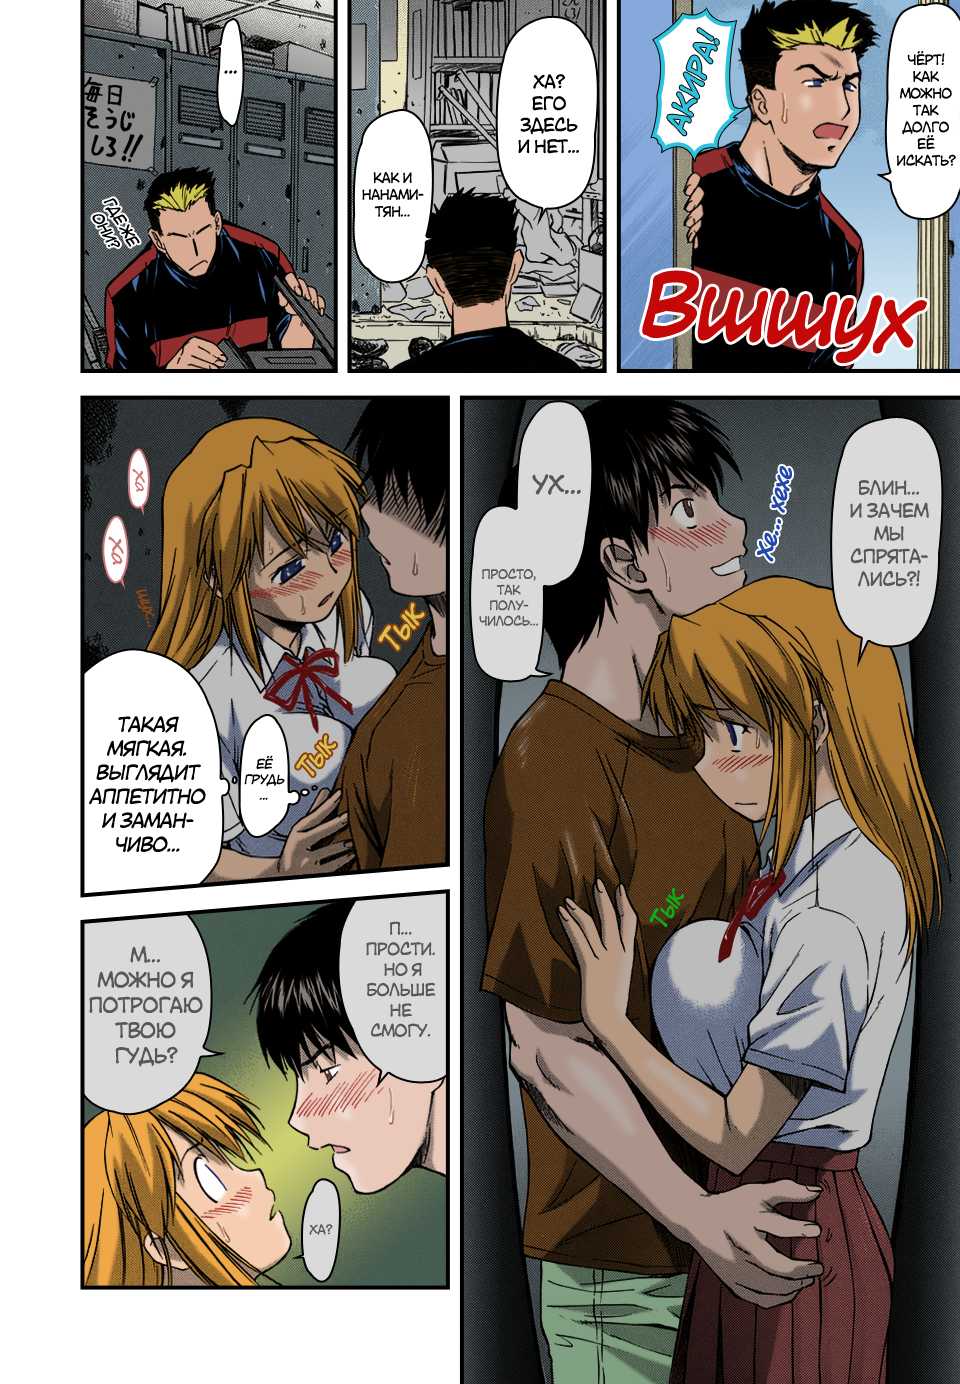 [Nagare Ippon] Offside Girl Ch. 1-5 [Russian] [Colorized] [Decensored] [WIP] - Page 17